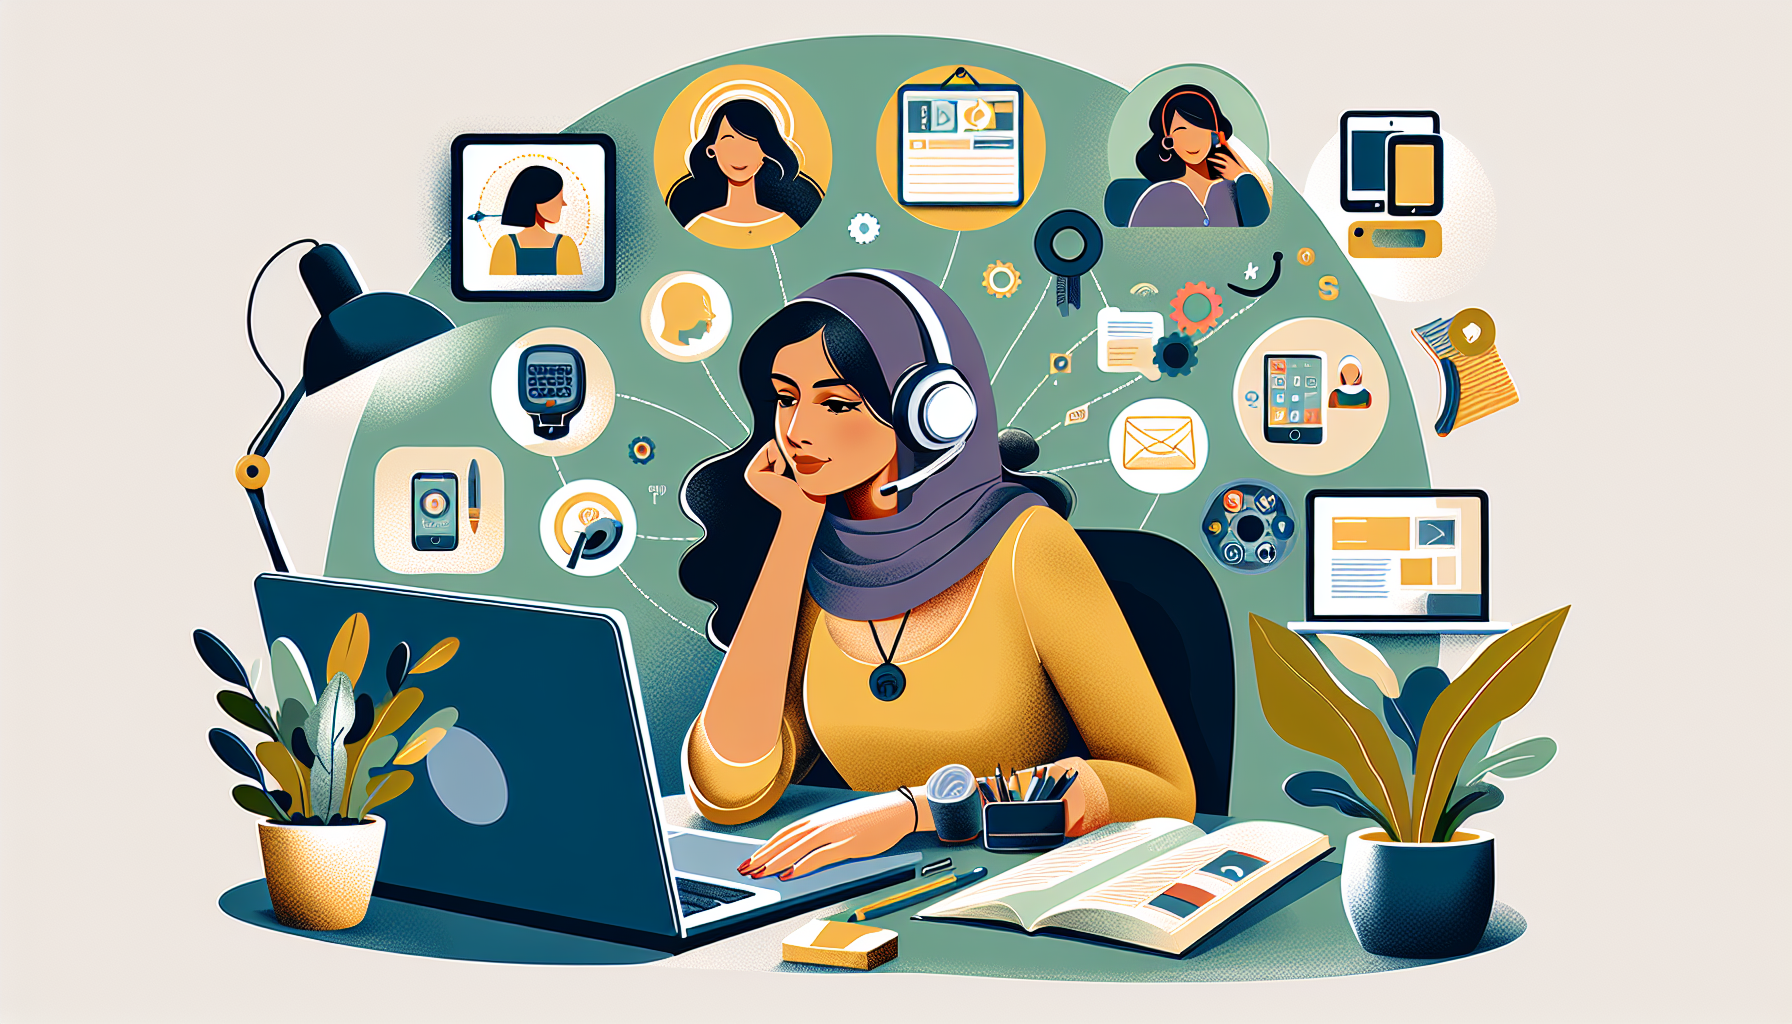 Create an image showcasing various online side hustles such as freelance writing, graphic design, virtual assistant, and online tutoring. The image should depict a person working from home at a desk with a laptop, surrounded by icons representing different digital services and tools like a design tablet, headset, online course materials, and a calendar. The background should feature modern, cozy home office decor, emphasizing flexibility and productivity.